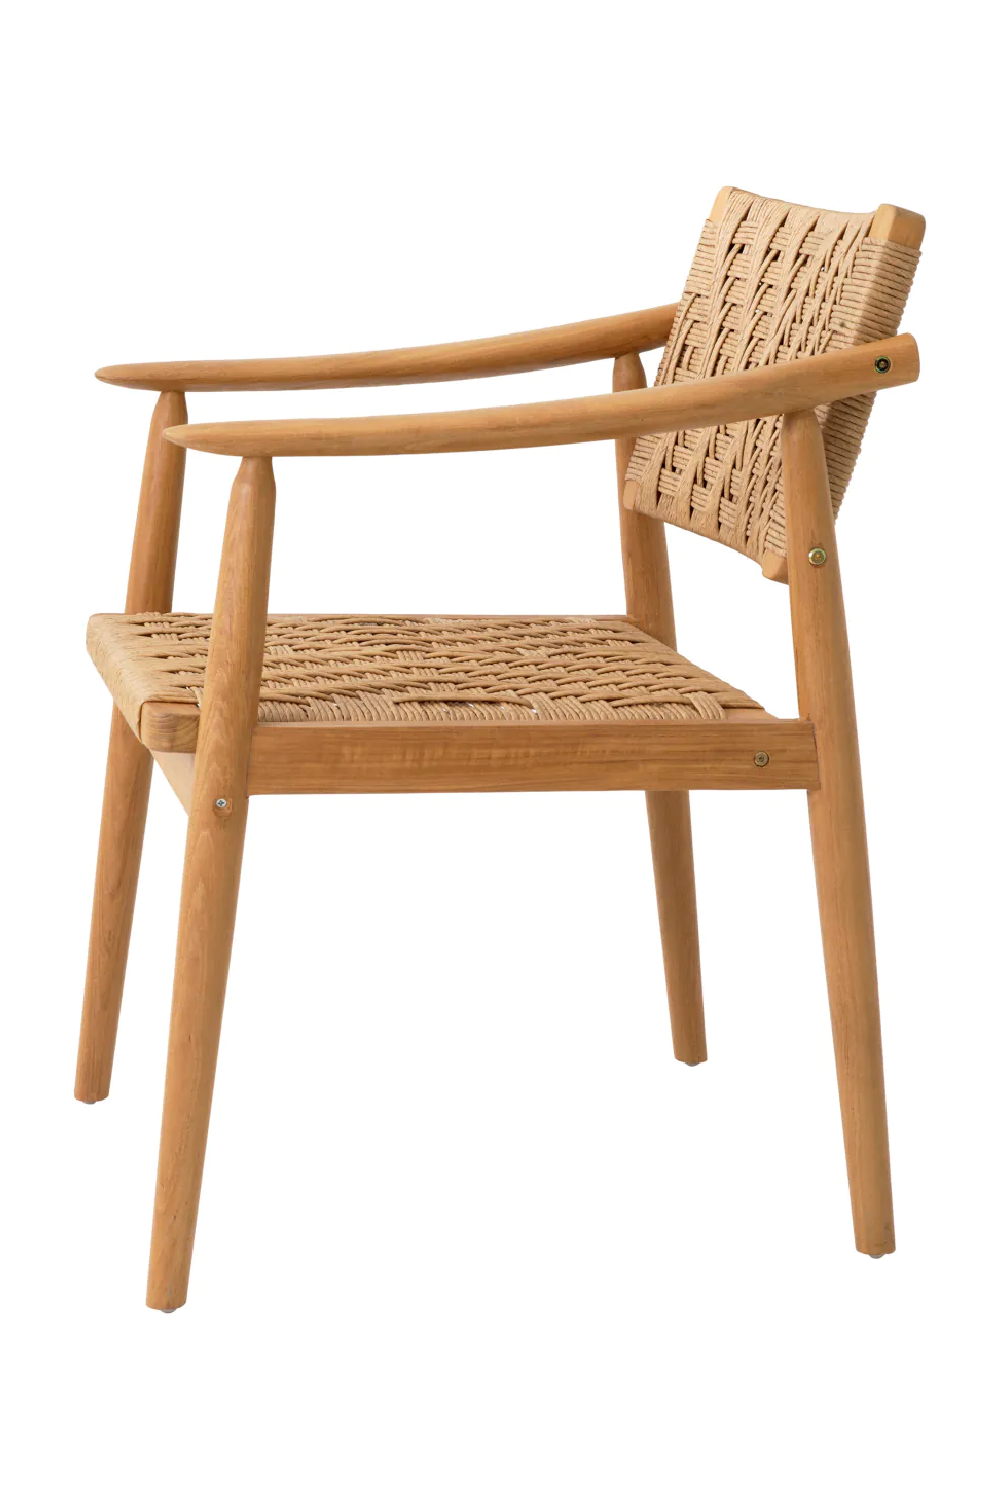 Natural Teak Outdoor Dining Chairs (2) | Eichholtz Coral Bay | Oroa.com